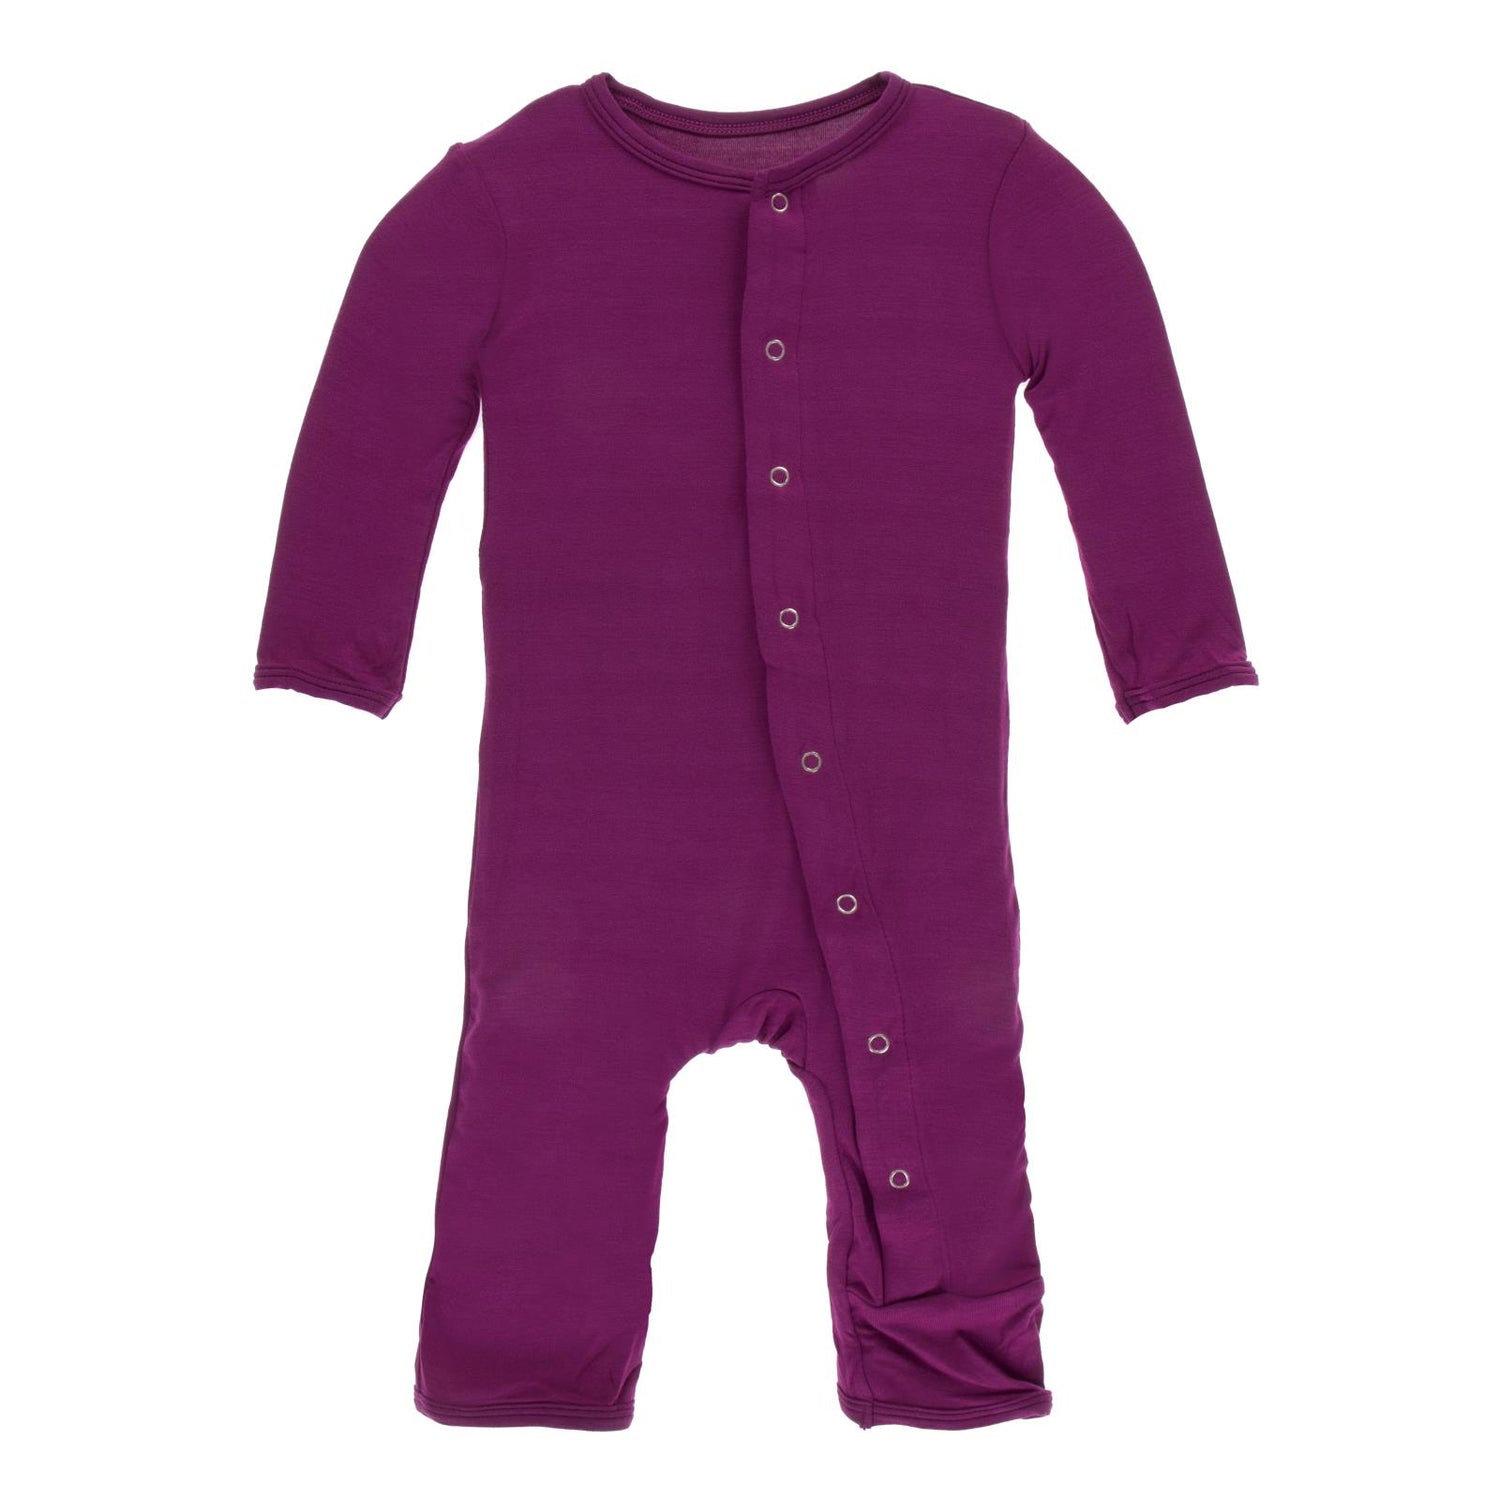 Coverall with Snaps in Orchid